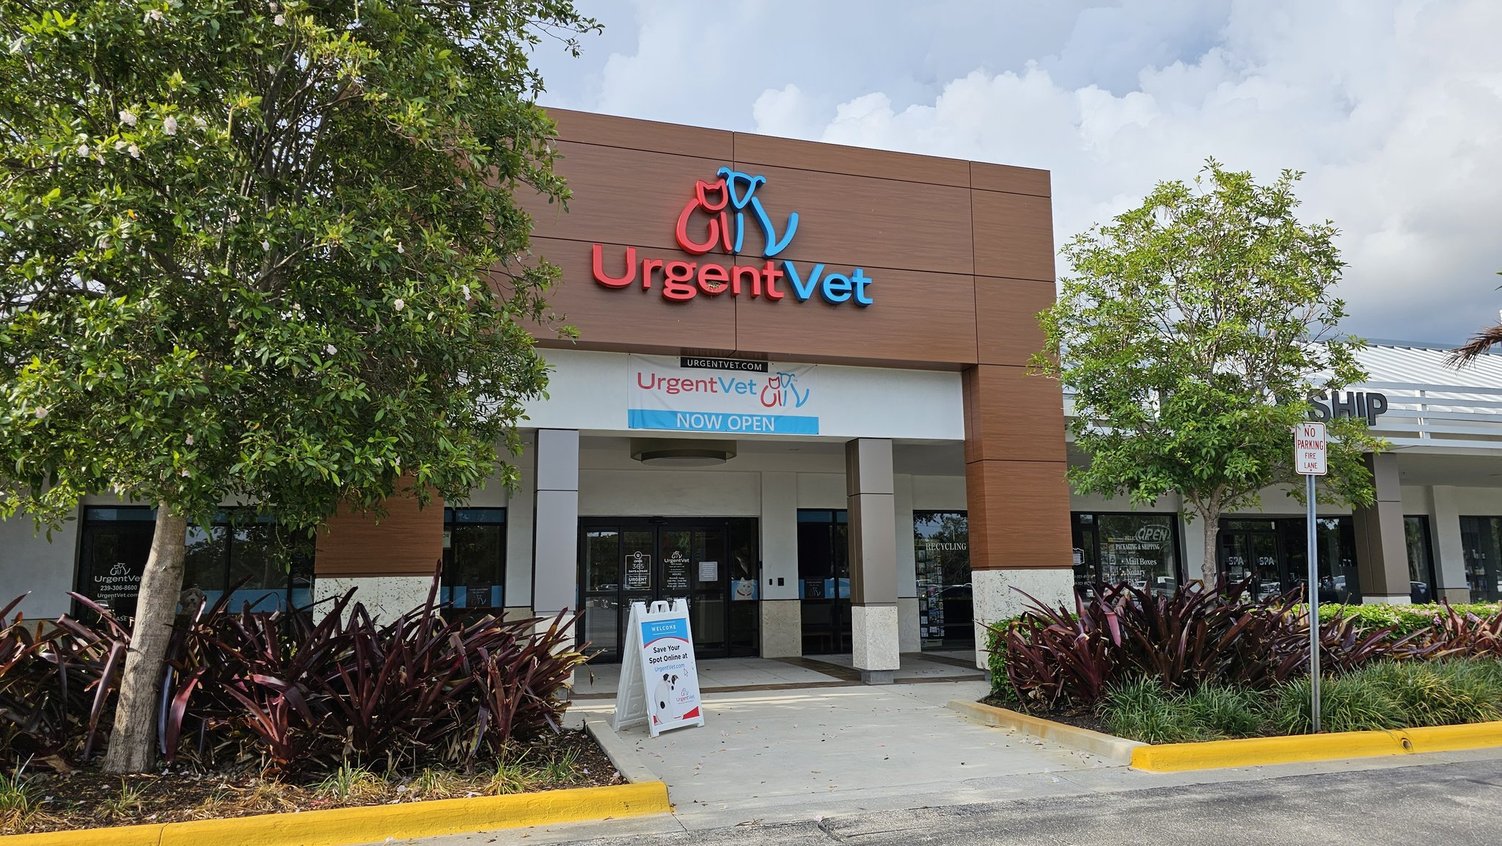 Featured image for post: Vet Care Clinic Jumps Into Expansion Mode in Southwest Florida